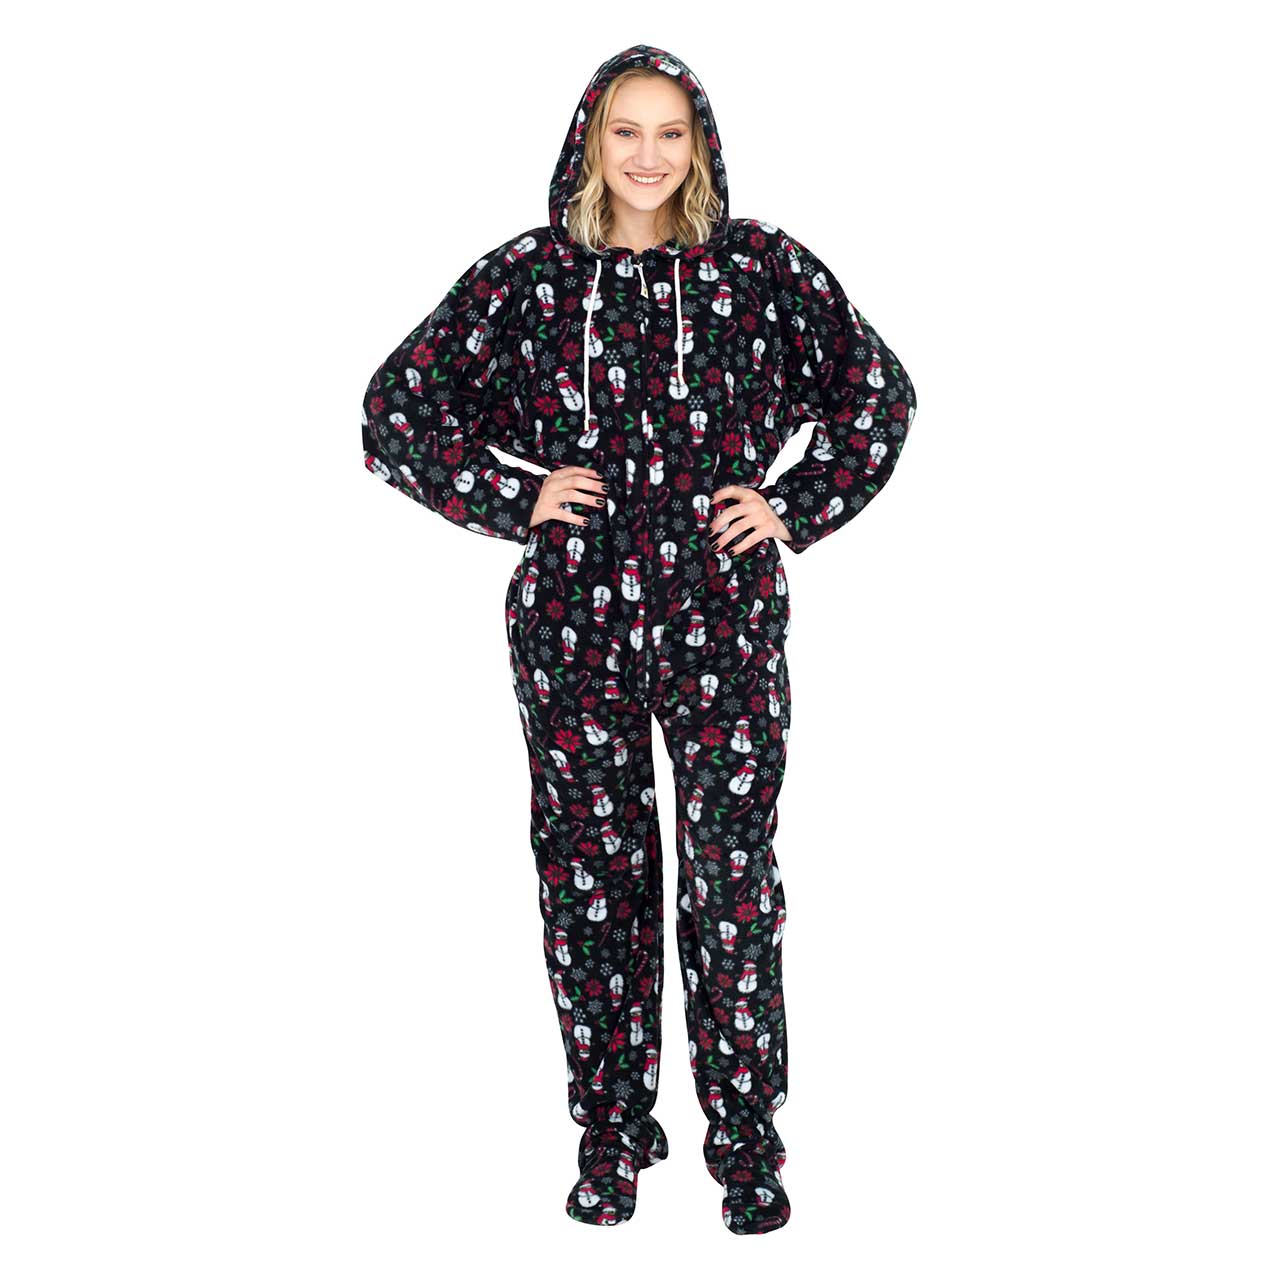 Snowmen and Candy Canes Black Ugly Christmas Pajama Suit with Hood,Ugly Christmas Sweaters | Funny Xmas Sweaters for Men and Women